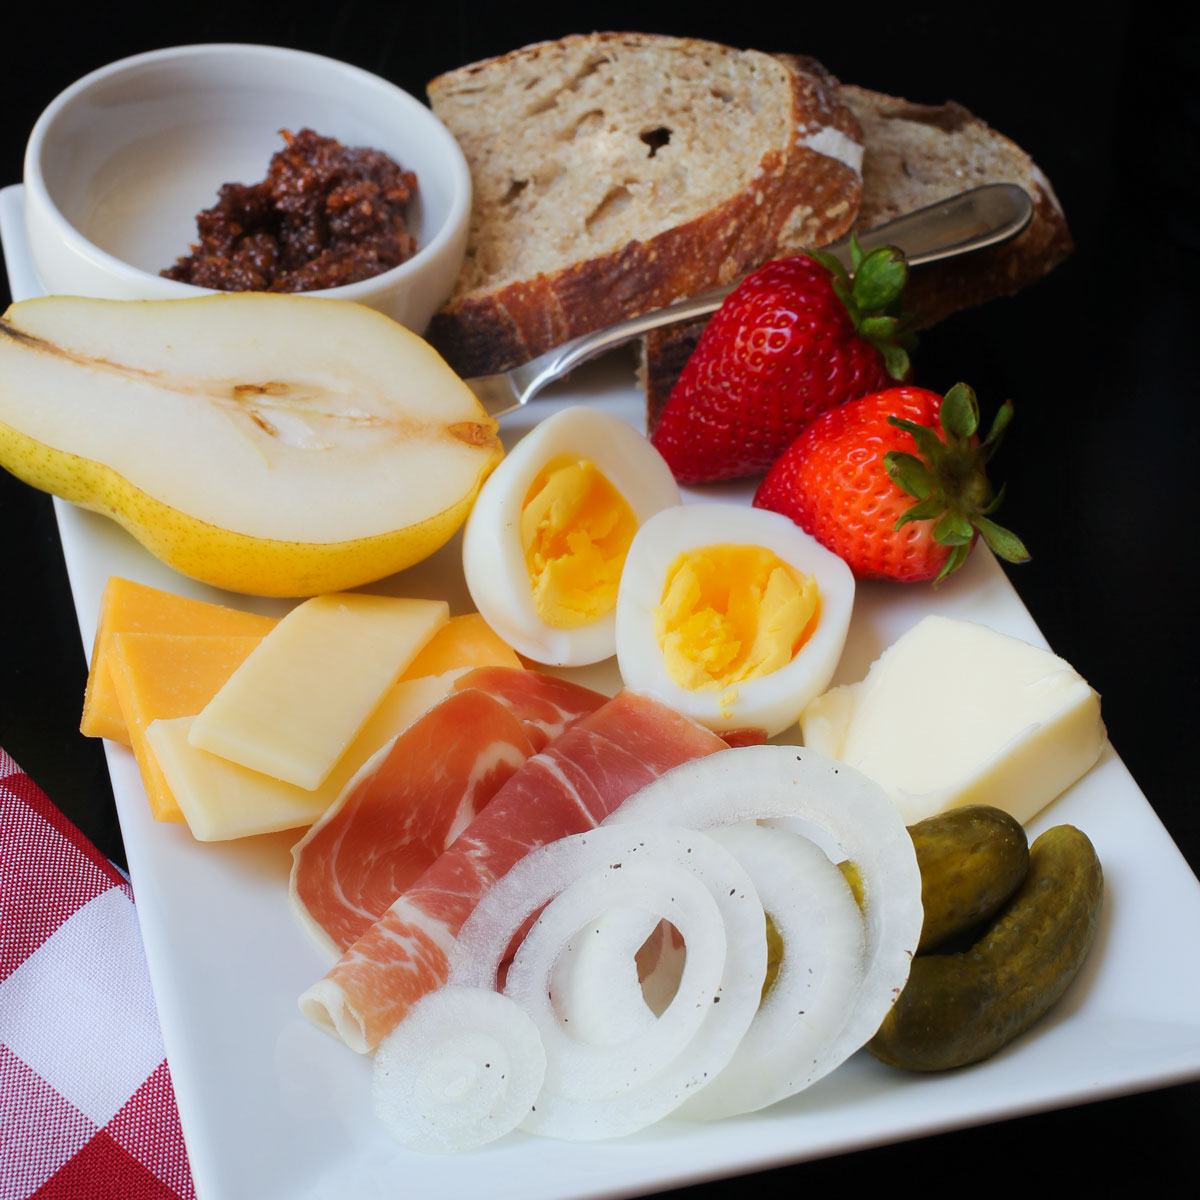 ploughman's lunch on a rectangular platter with fruit and veg and egg.